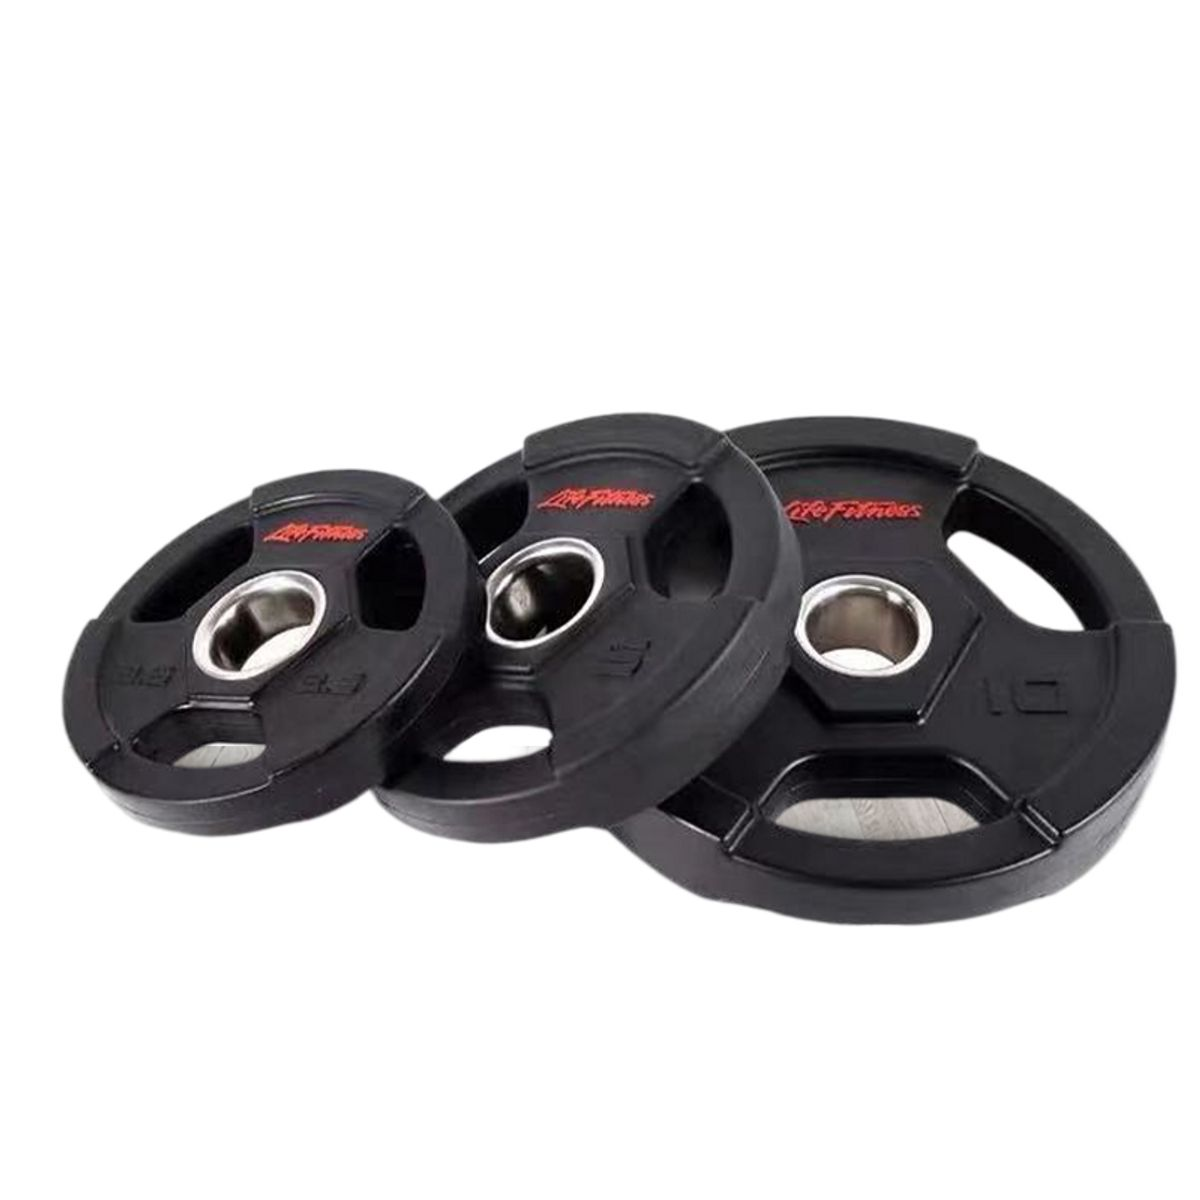 Wholesale weight plates barbell for gym fitness